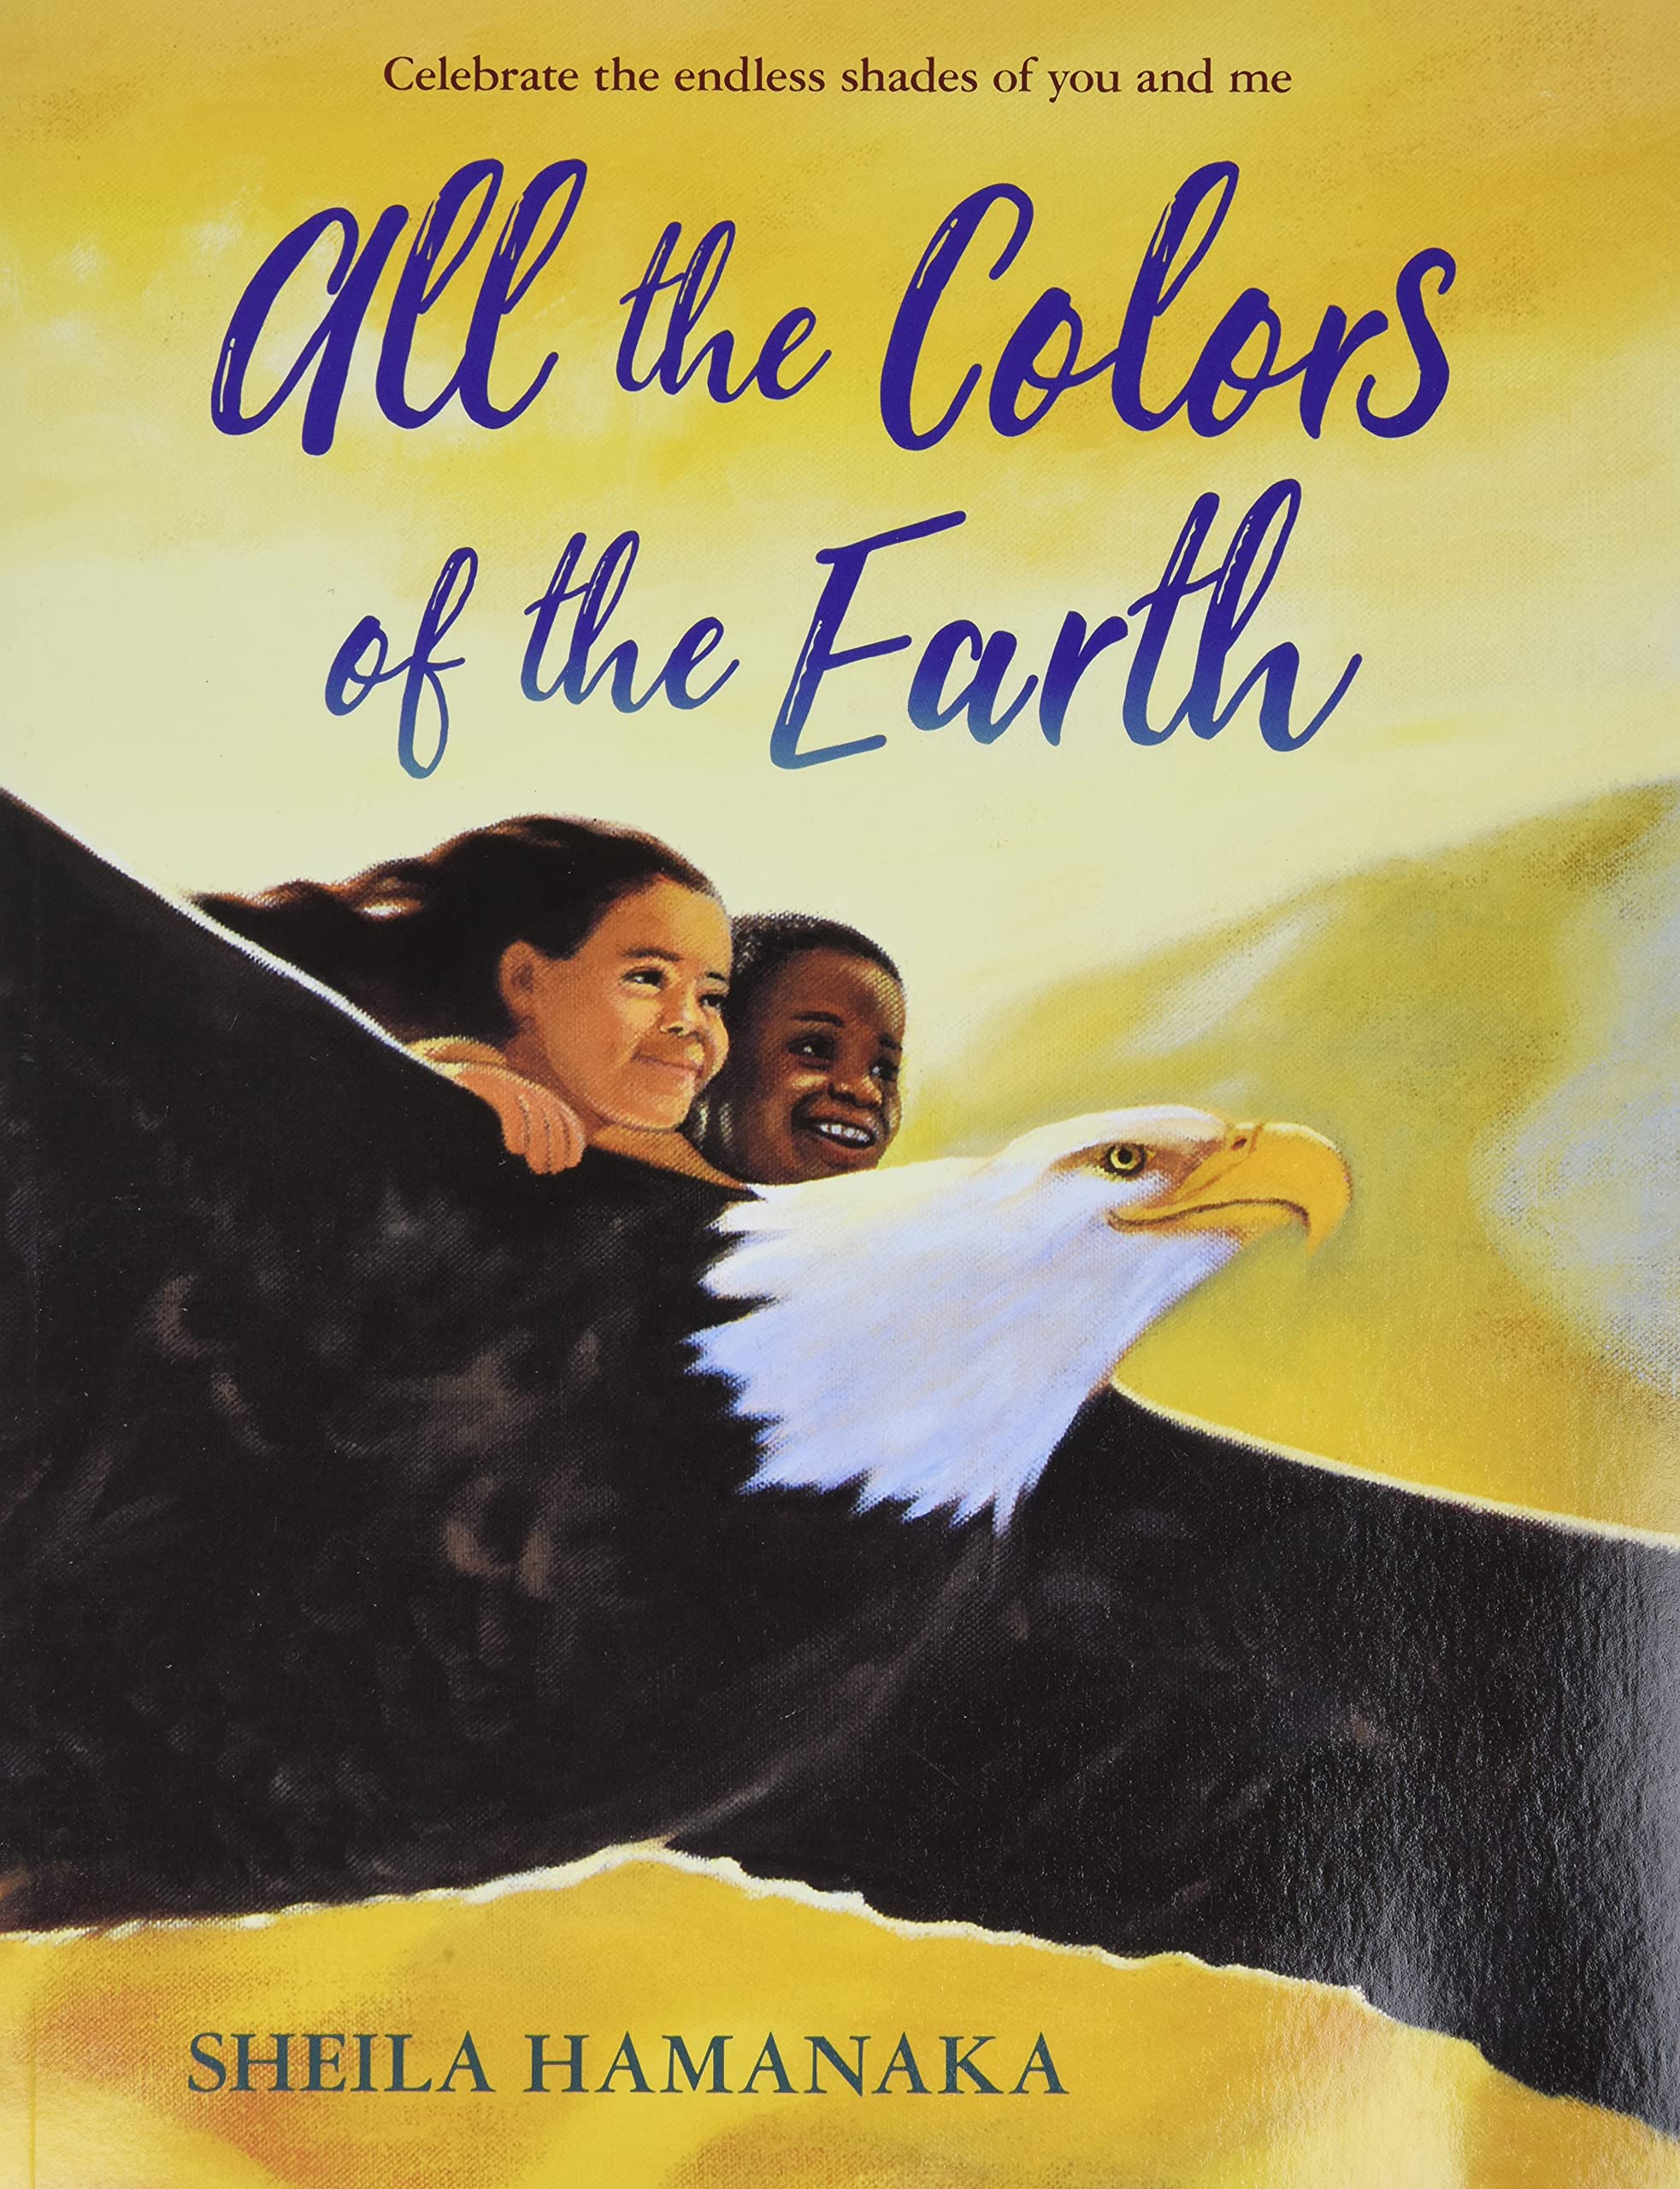 All the Colors of the Earth (Paperback, Reprint)